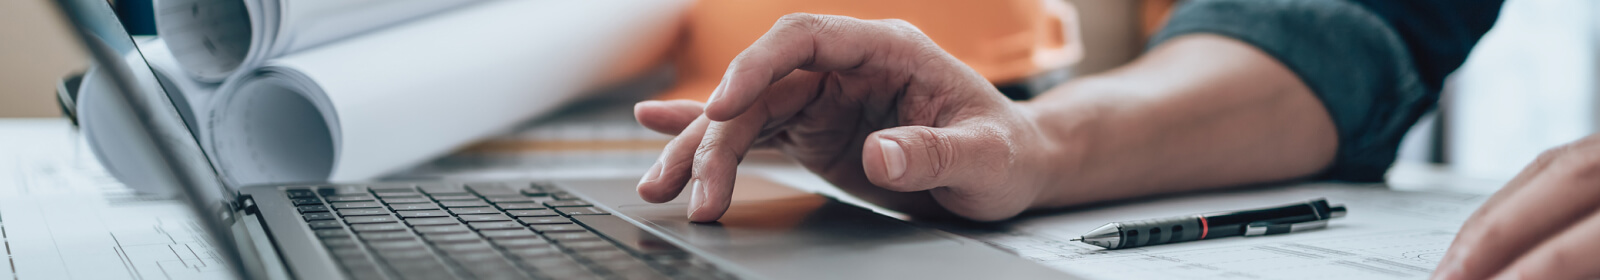 close-up of hands using a laptop